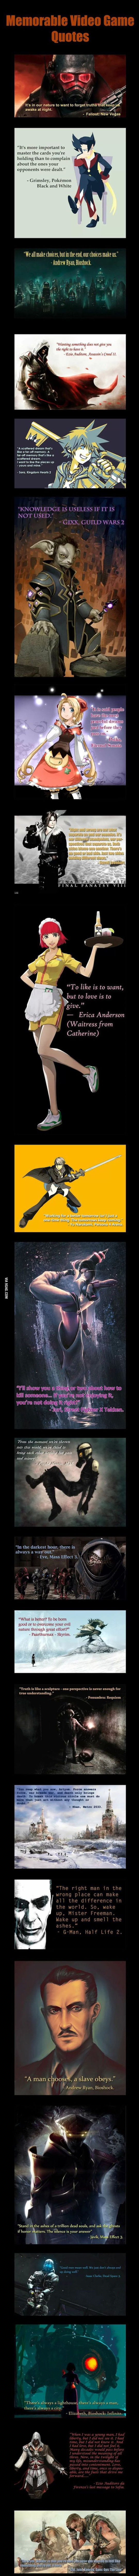 Most awarded games of all time. Thoughts? - 9GAG